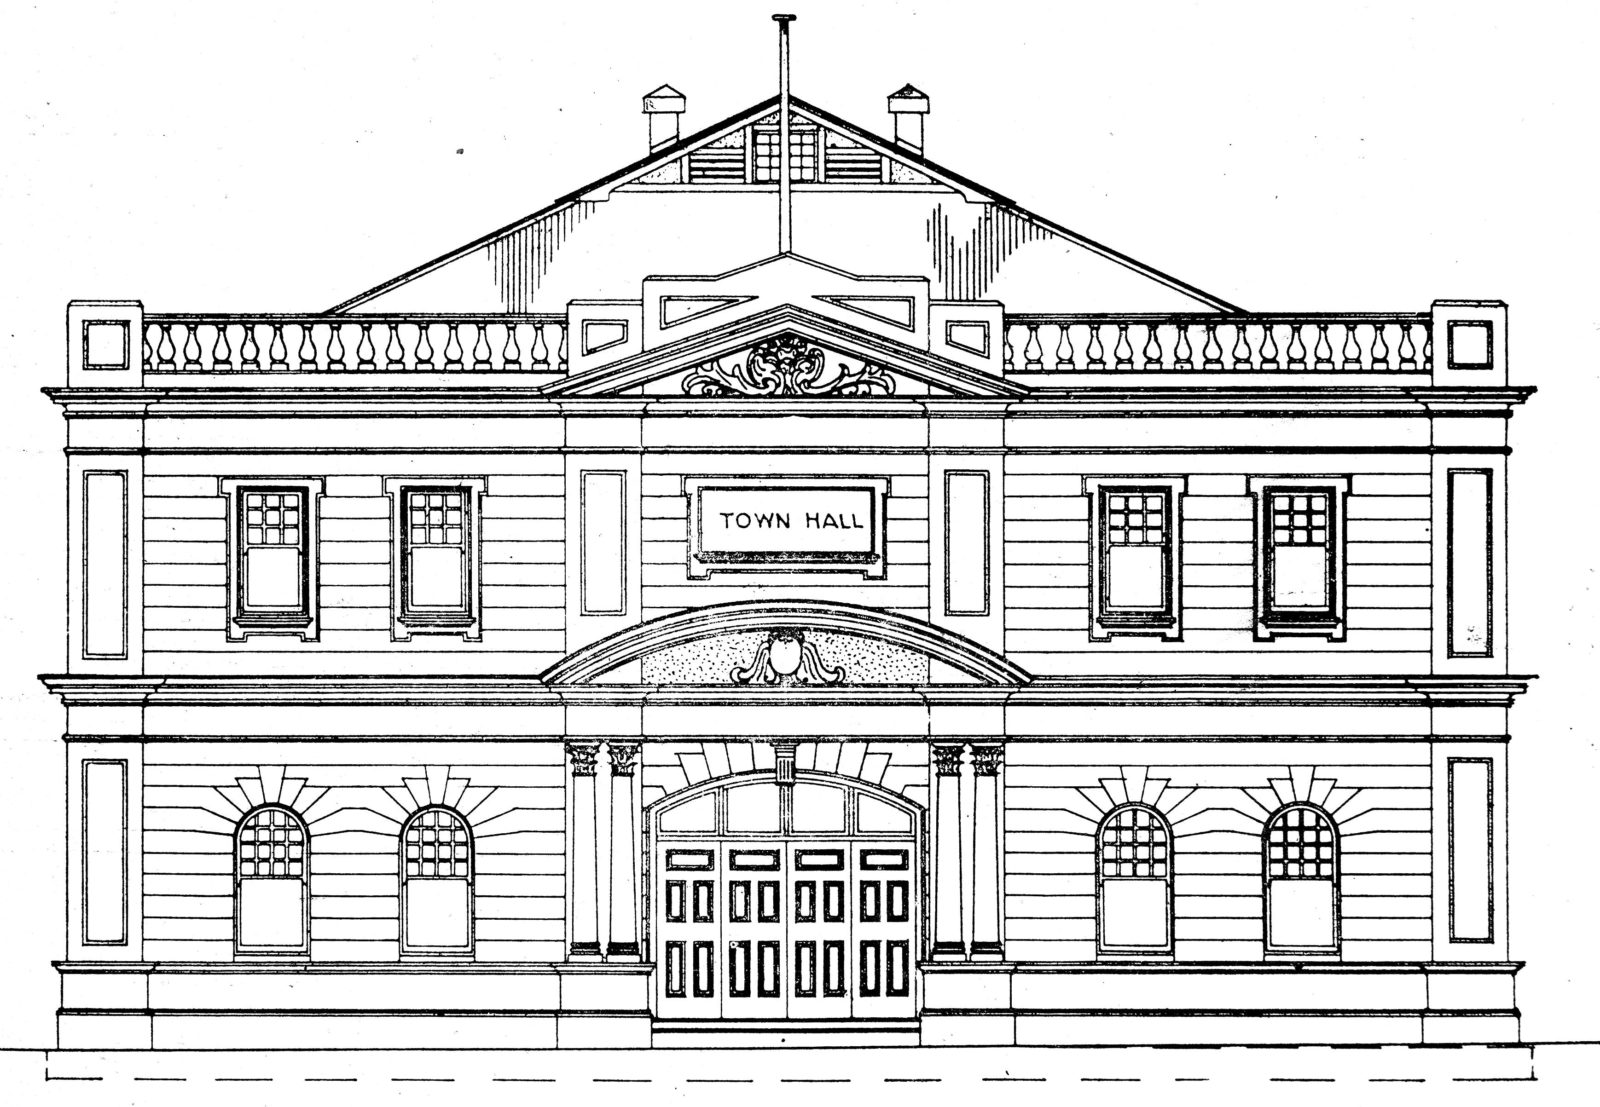 Sketch of Clare Town Hall, 1926